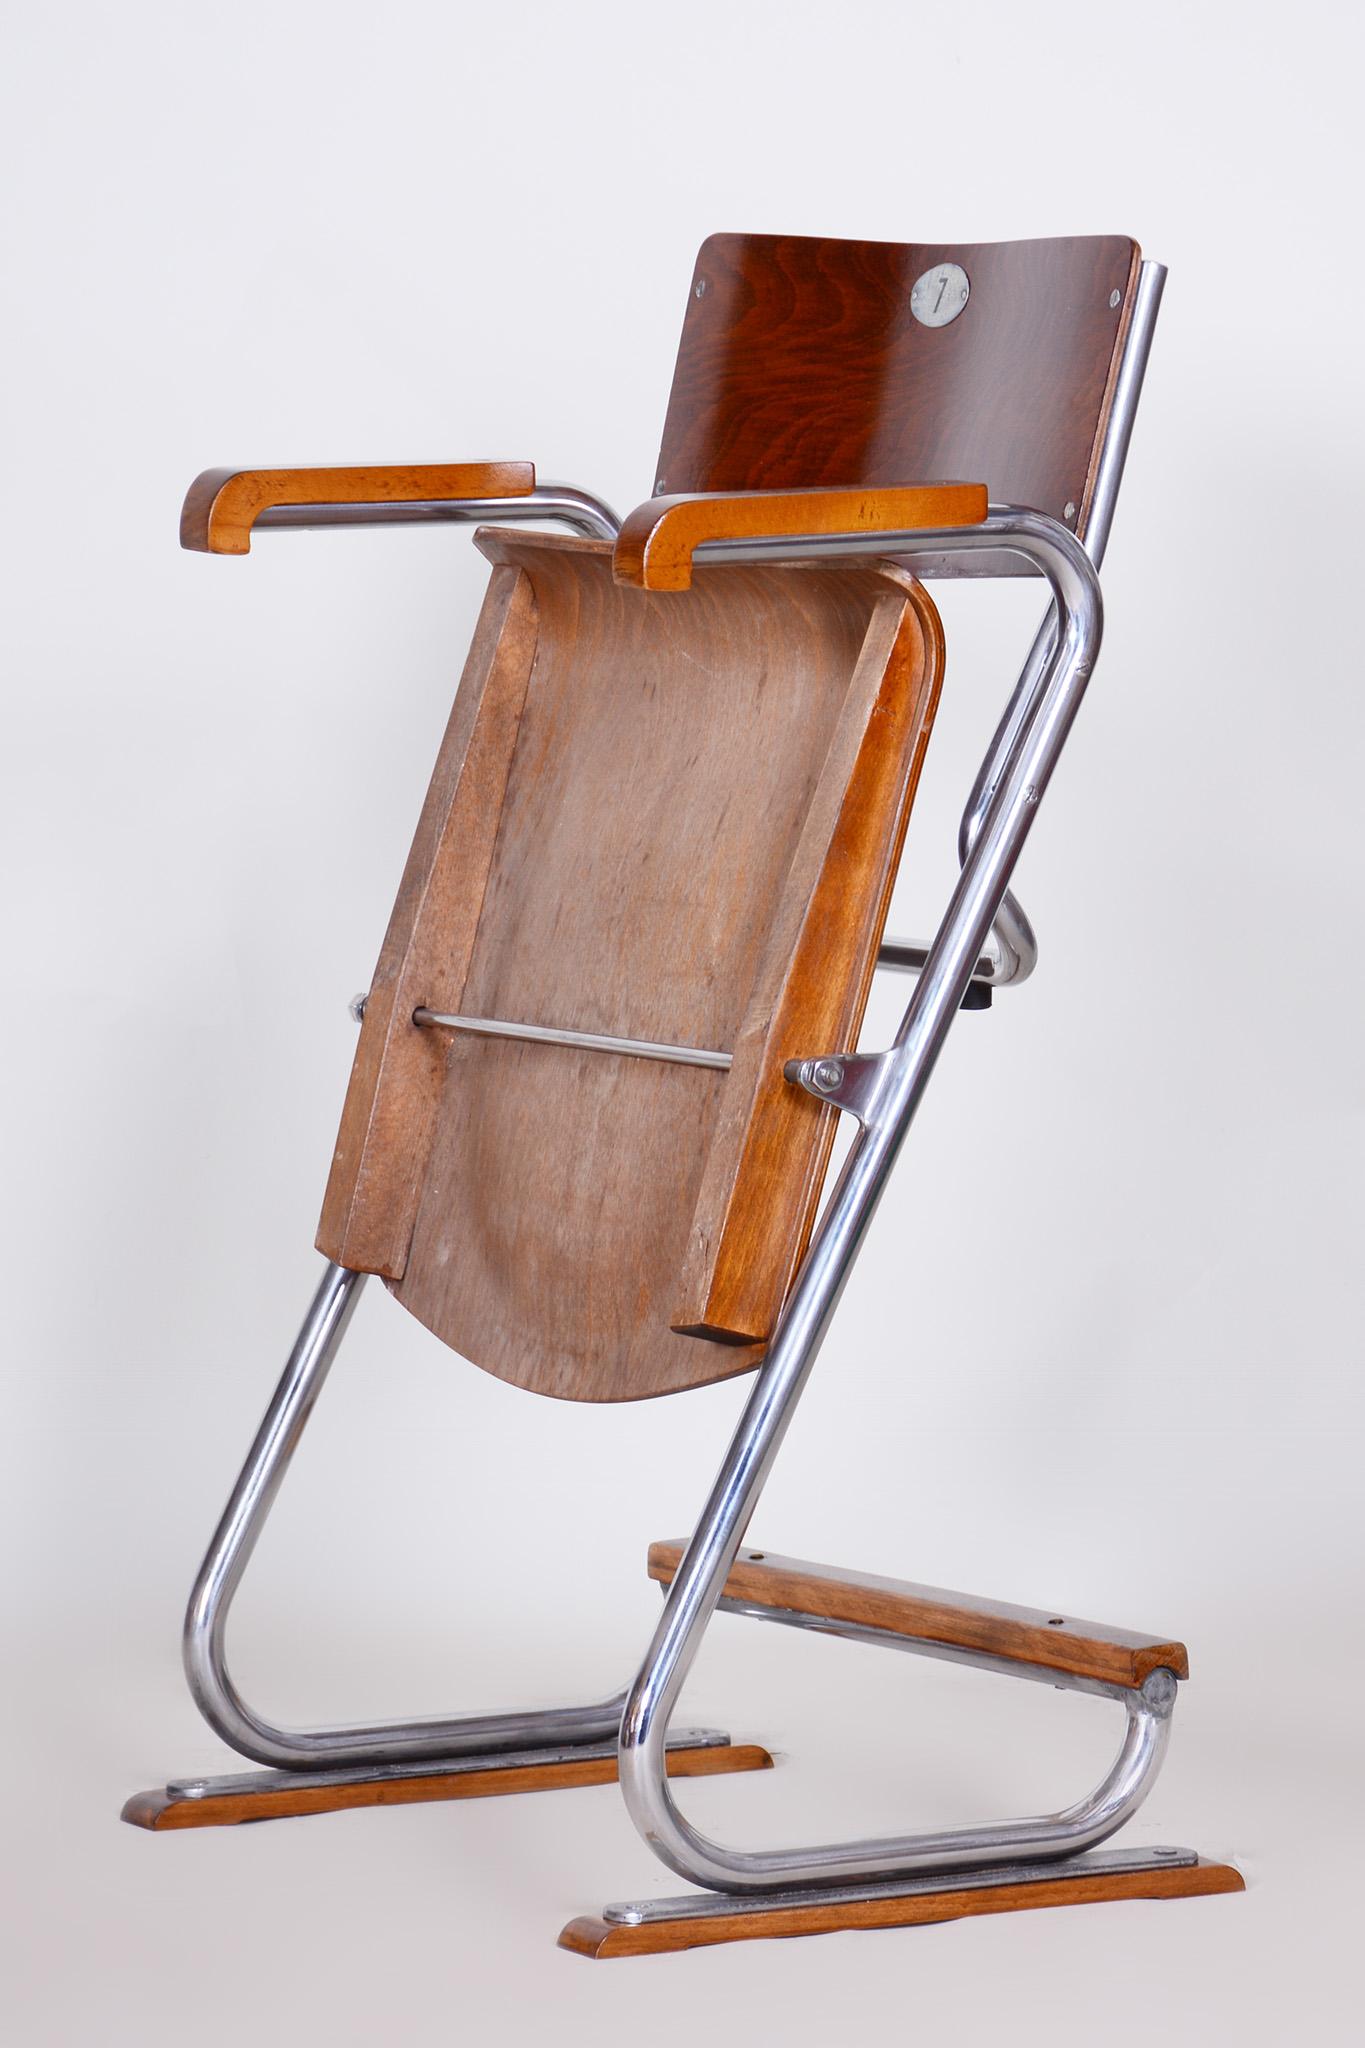 Restored Bauhaus Folding Chair, Beech Plywood, Revived Polish, Czechia, 1930s In Good Condition For Sale In Horomerice, CZ